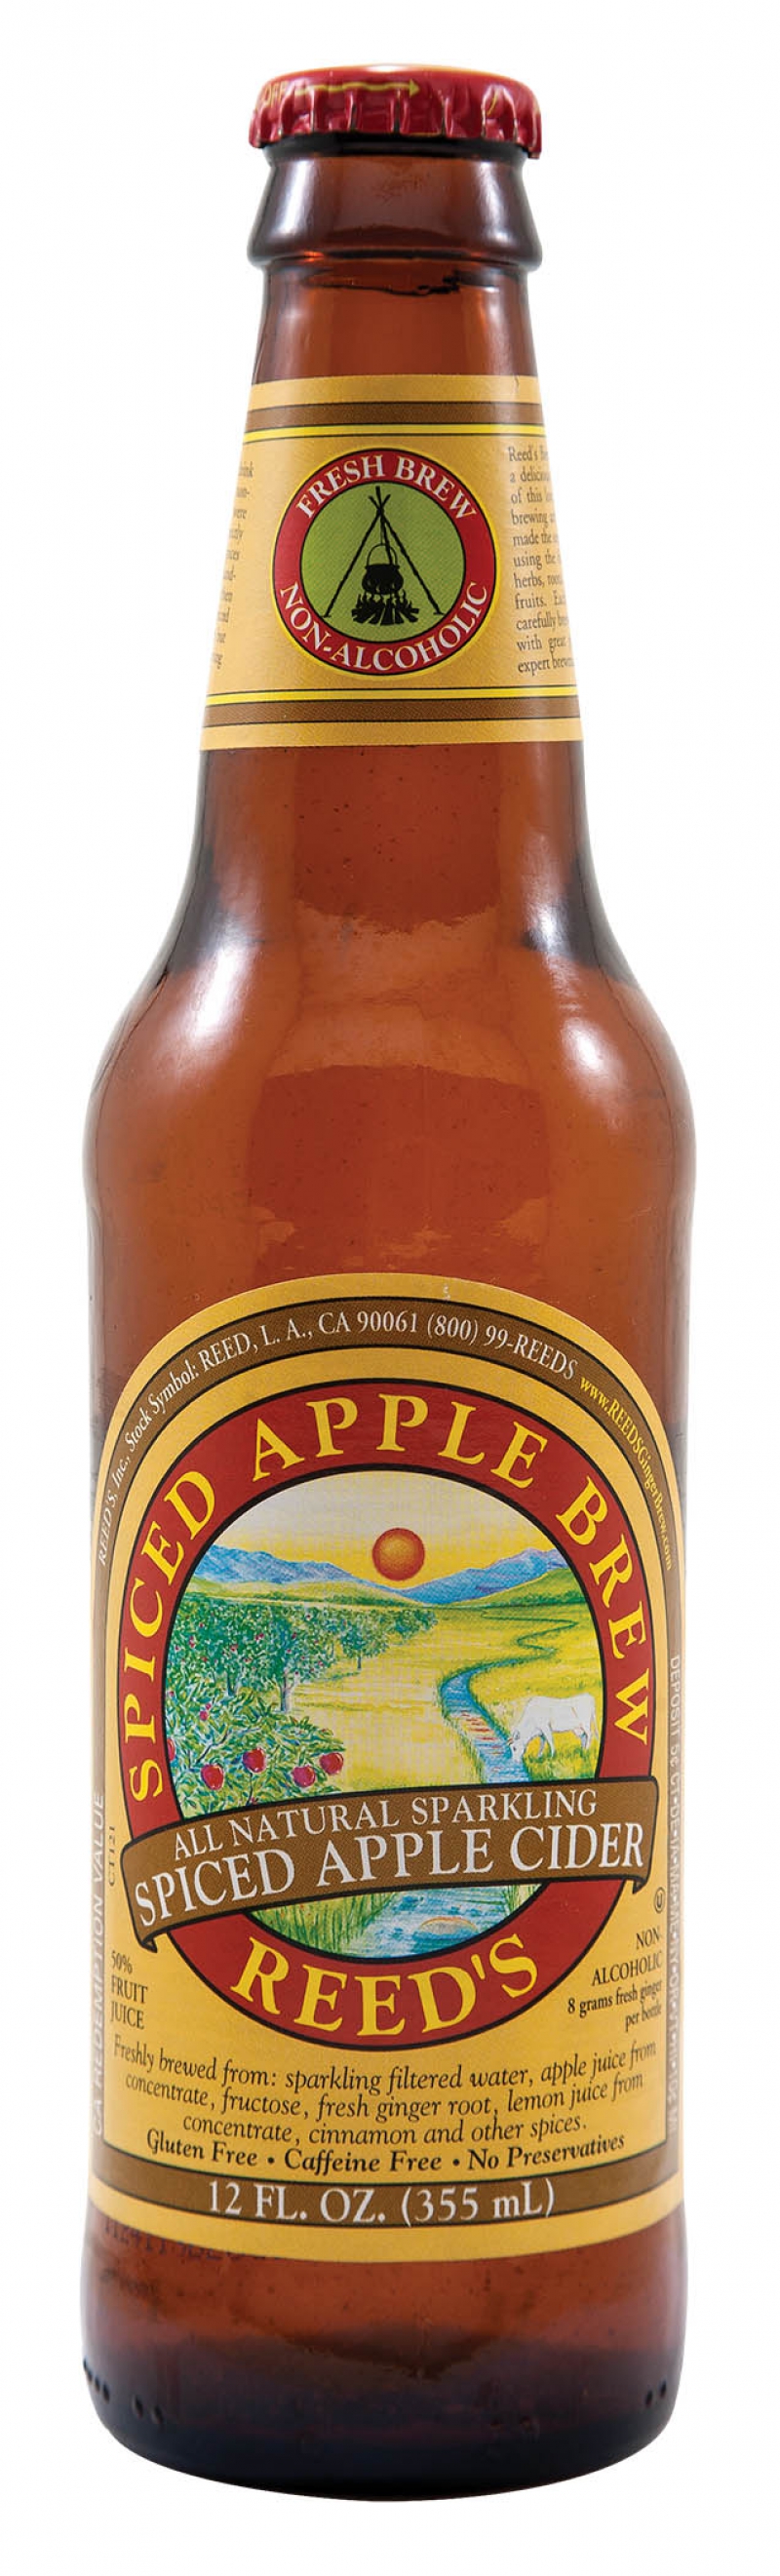 Reed’s Spiced Apple Cider Brew